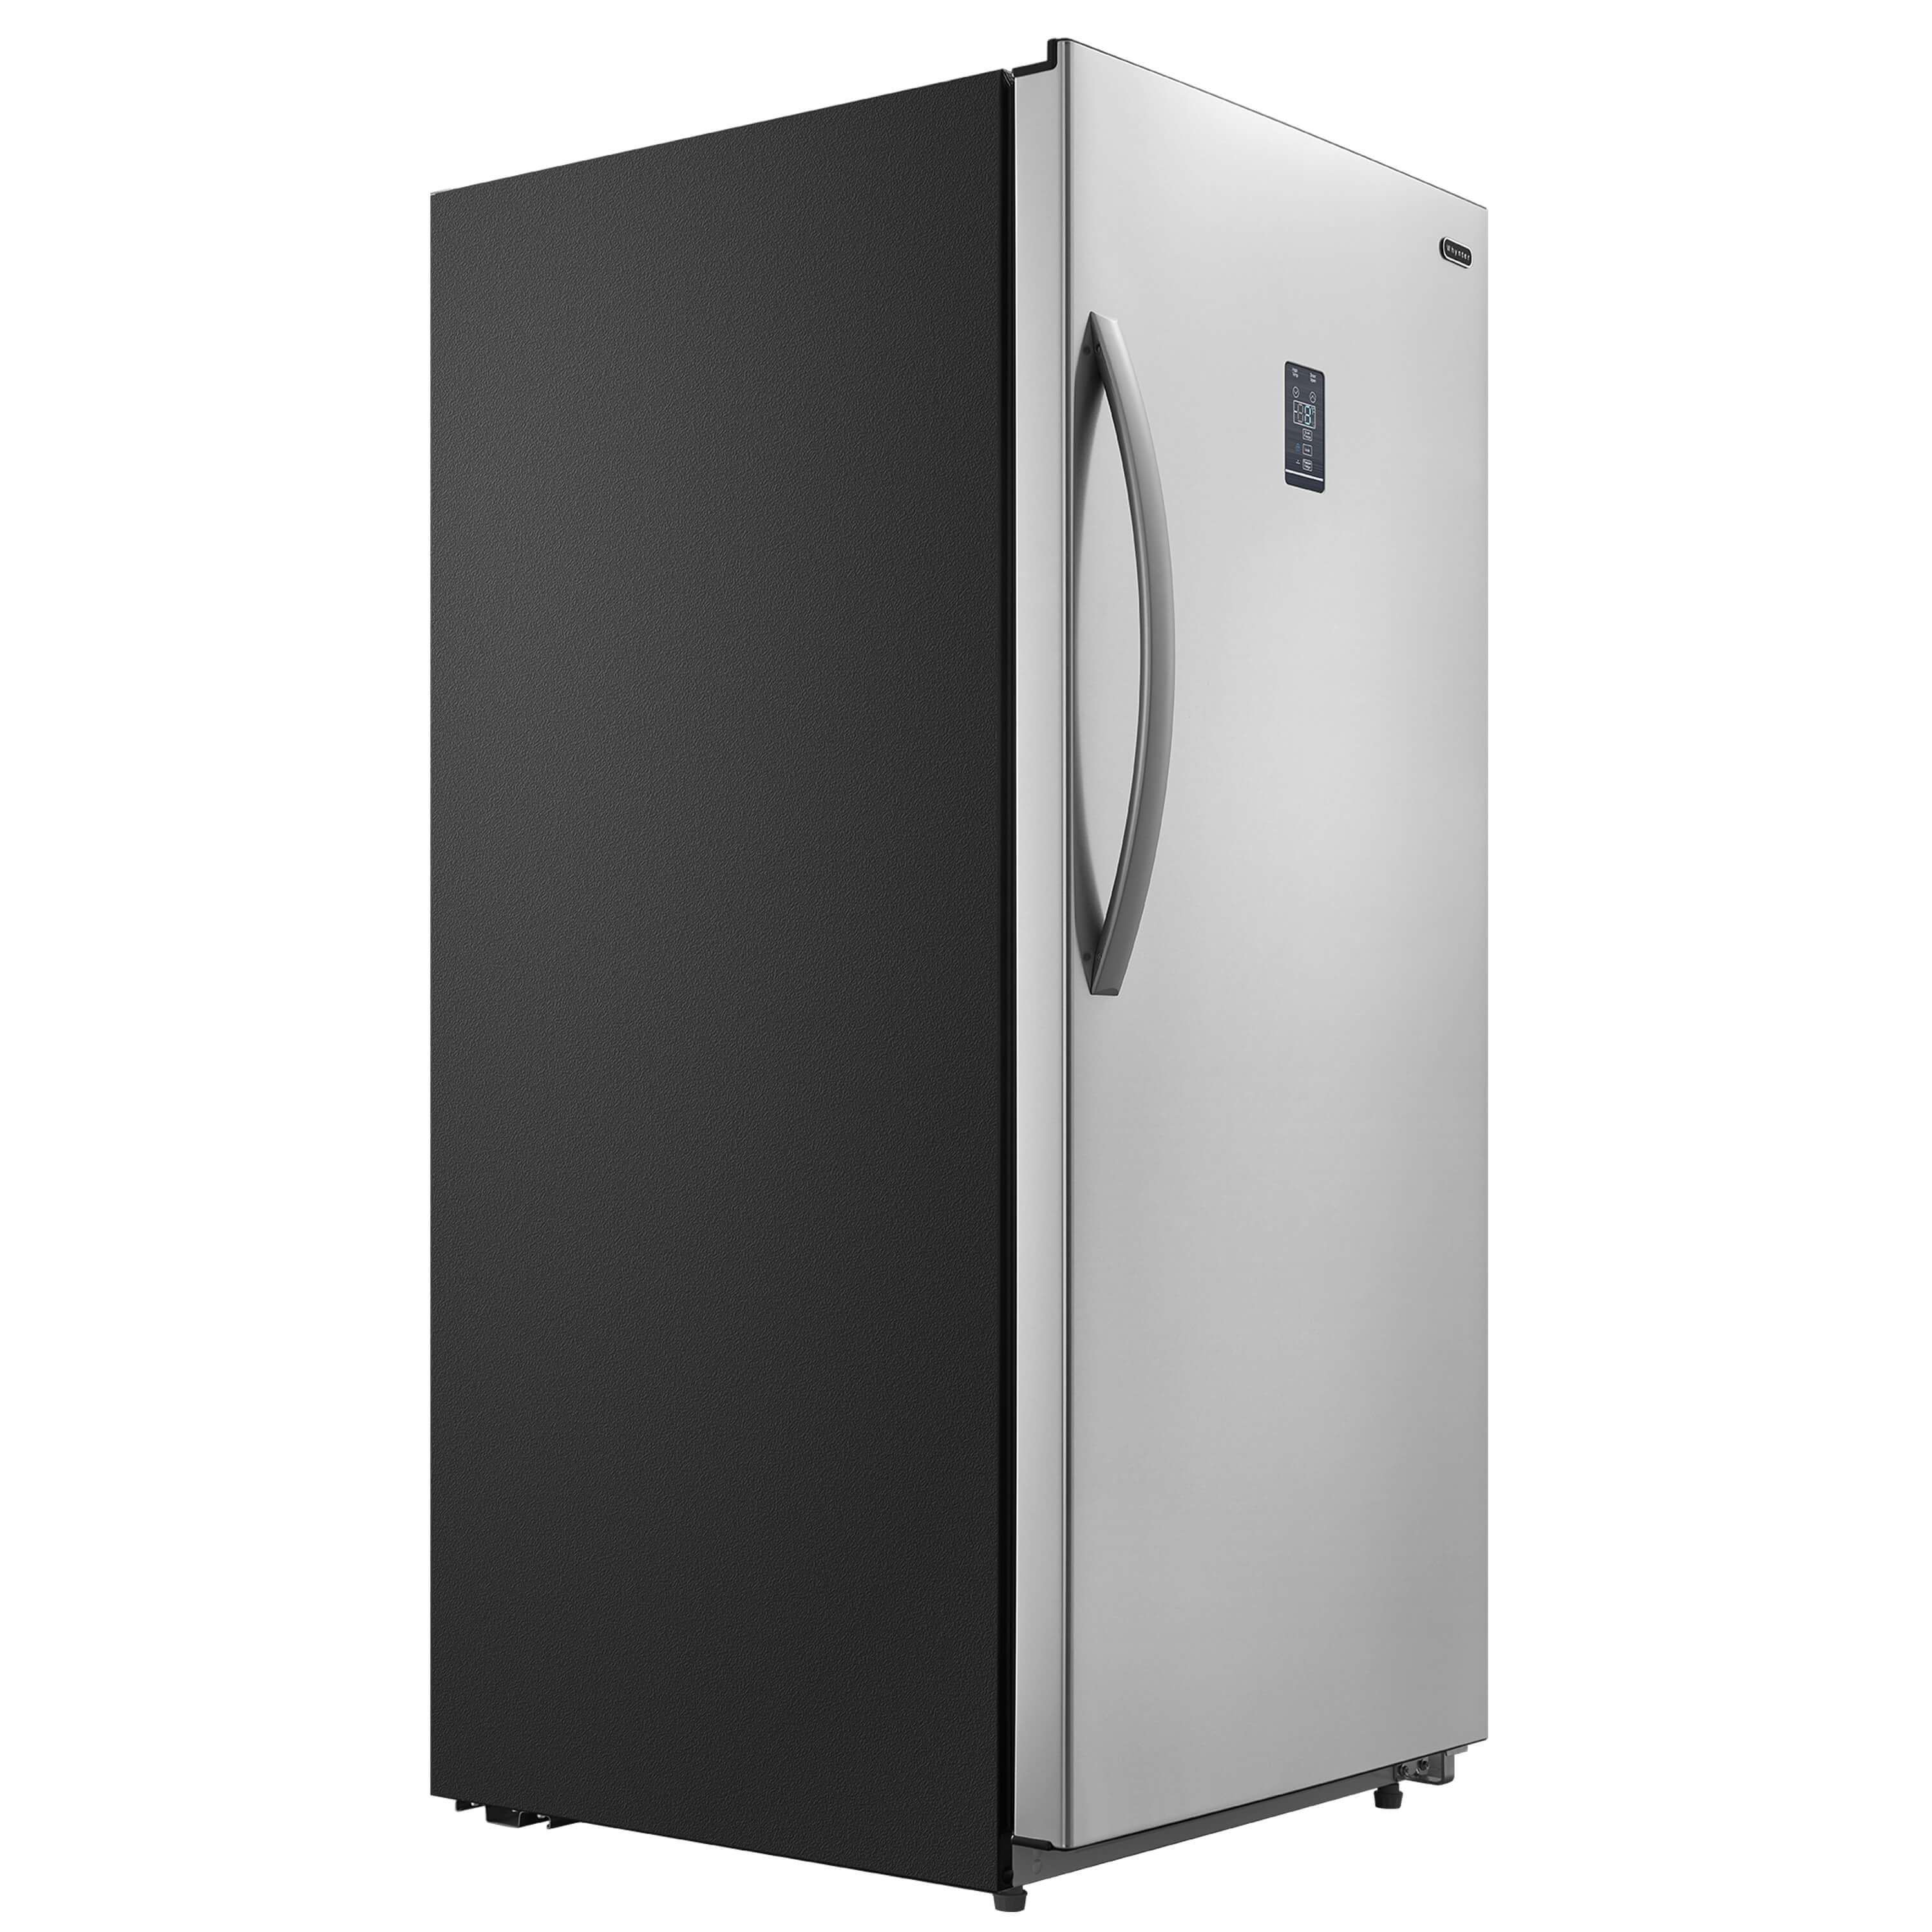 Whynter 13.8 cu.ft. Energy Star Digital Upright Convertible Deep Freezer / Refrigerator  - Stainless Steel UDF-139SS Wine Coolers Empire